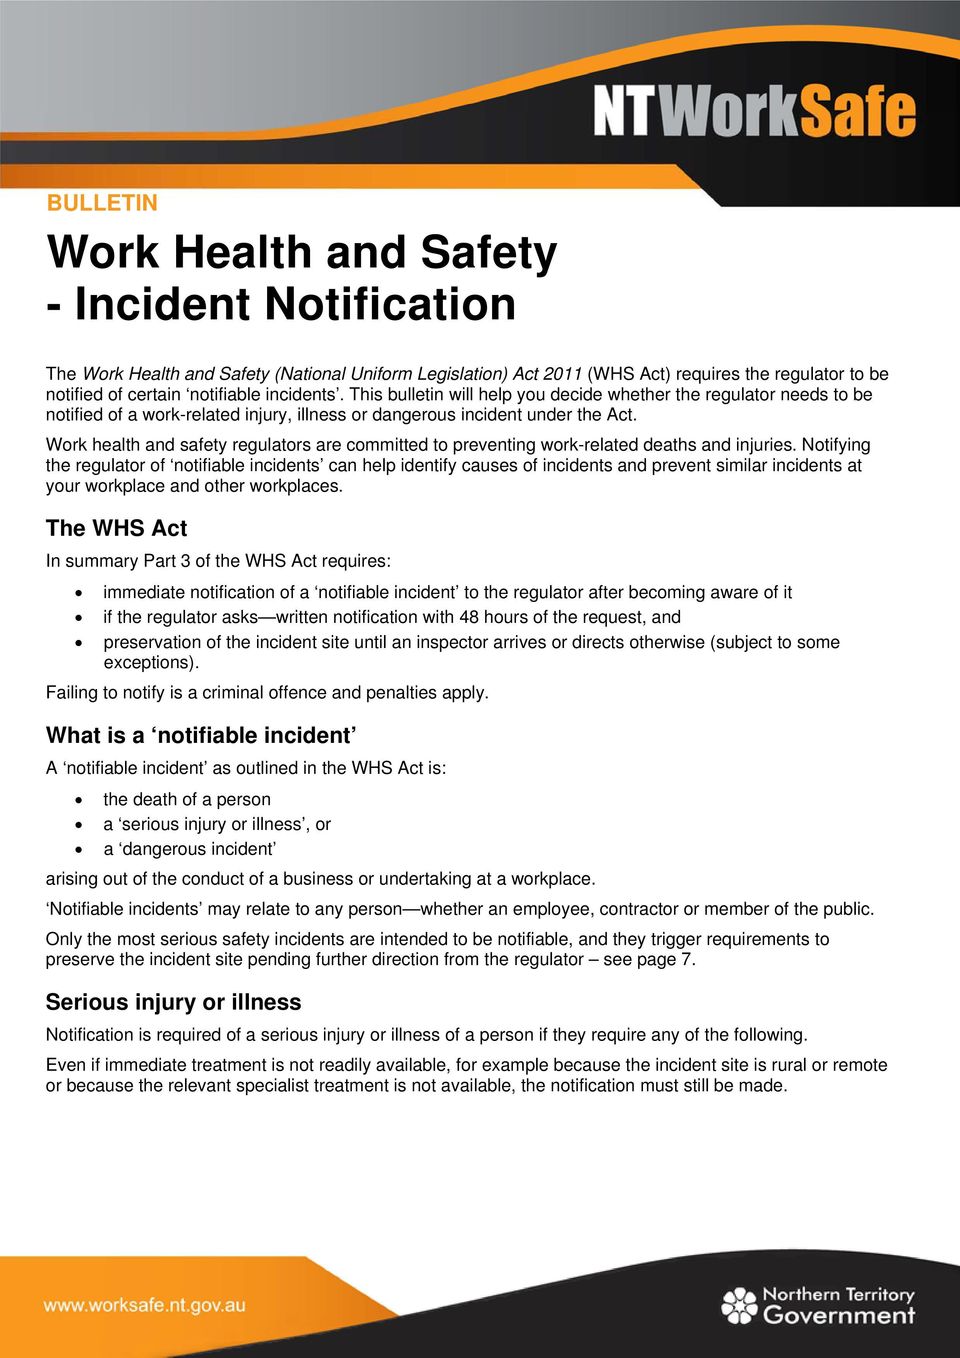 Work health and safety regulators are committed to preventing work-related deaths and injuries.